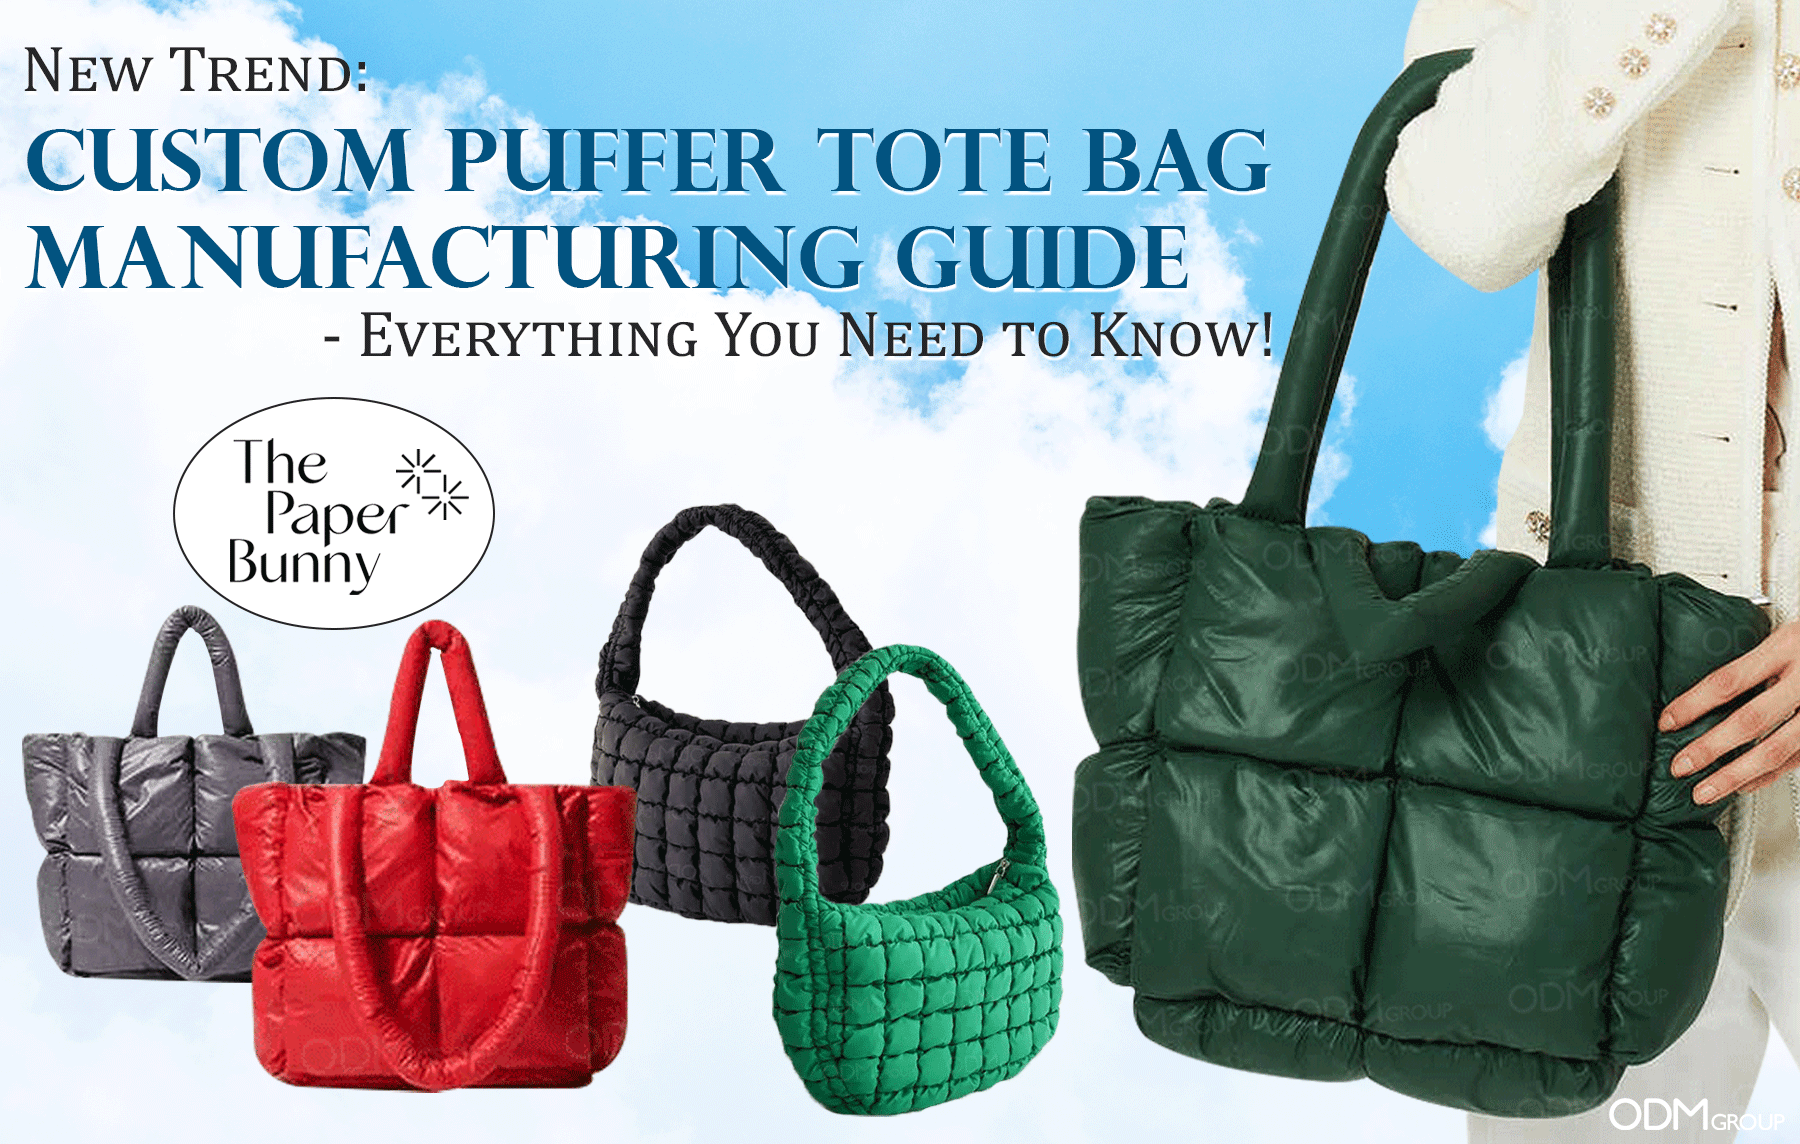 How to Choose the Right Puffer Tote Bag for Your Business in 2023?